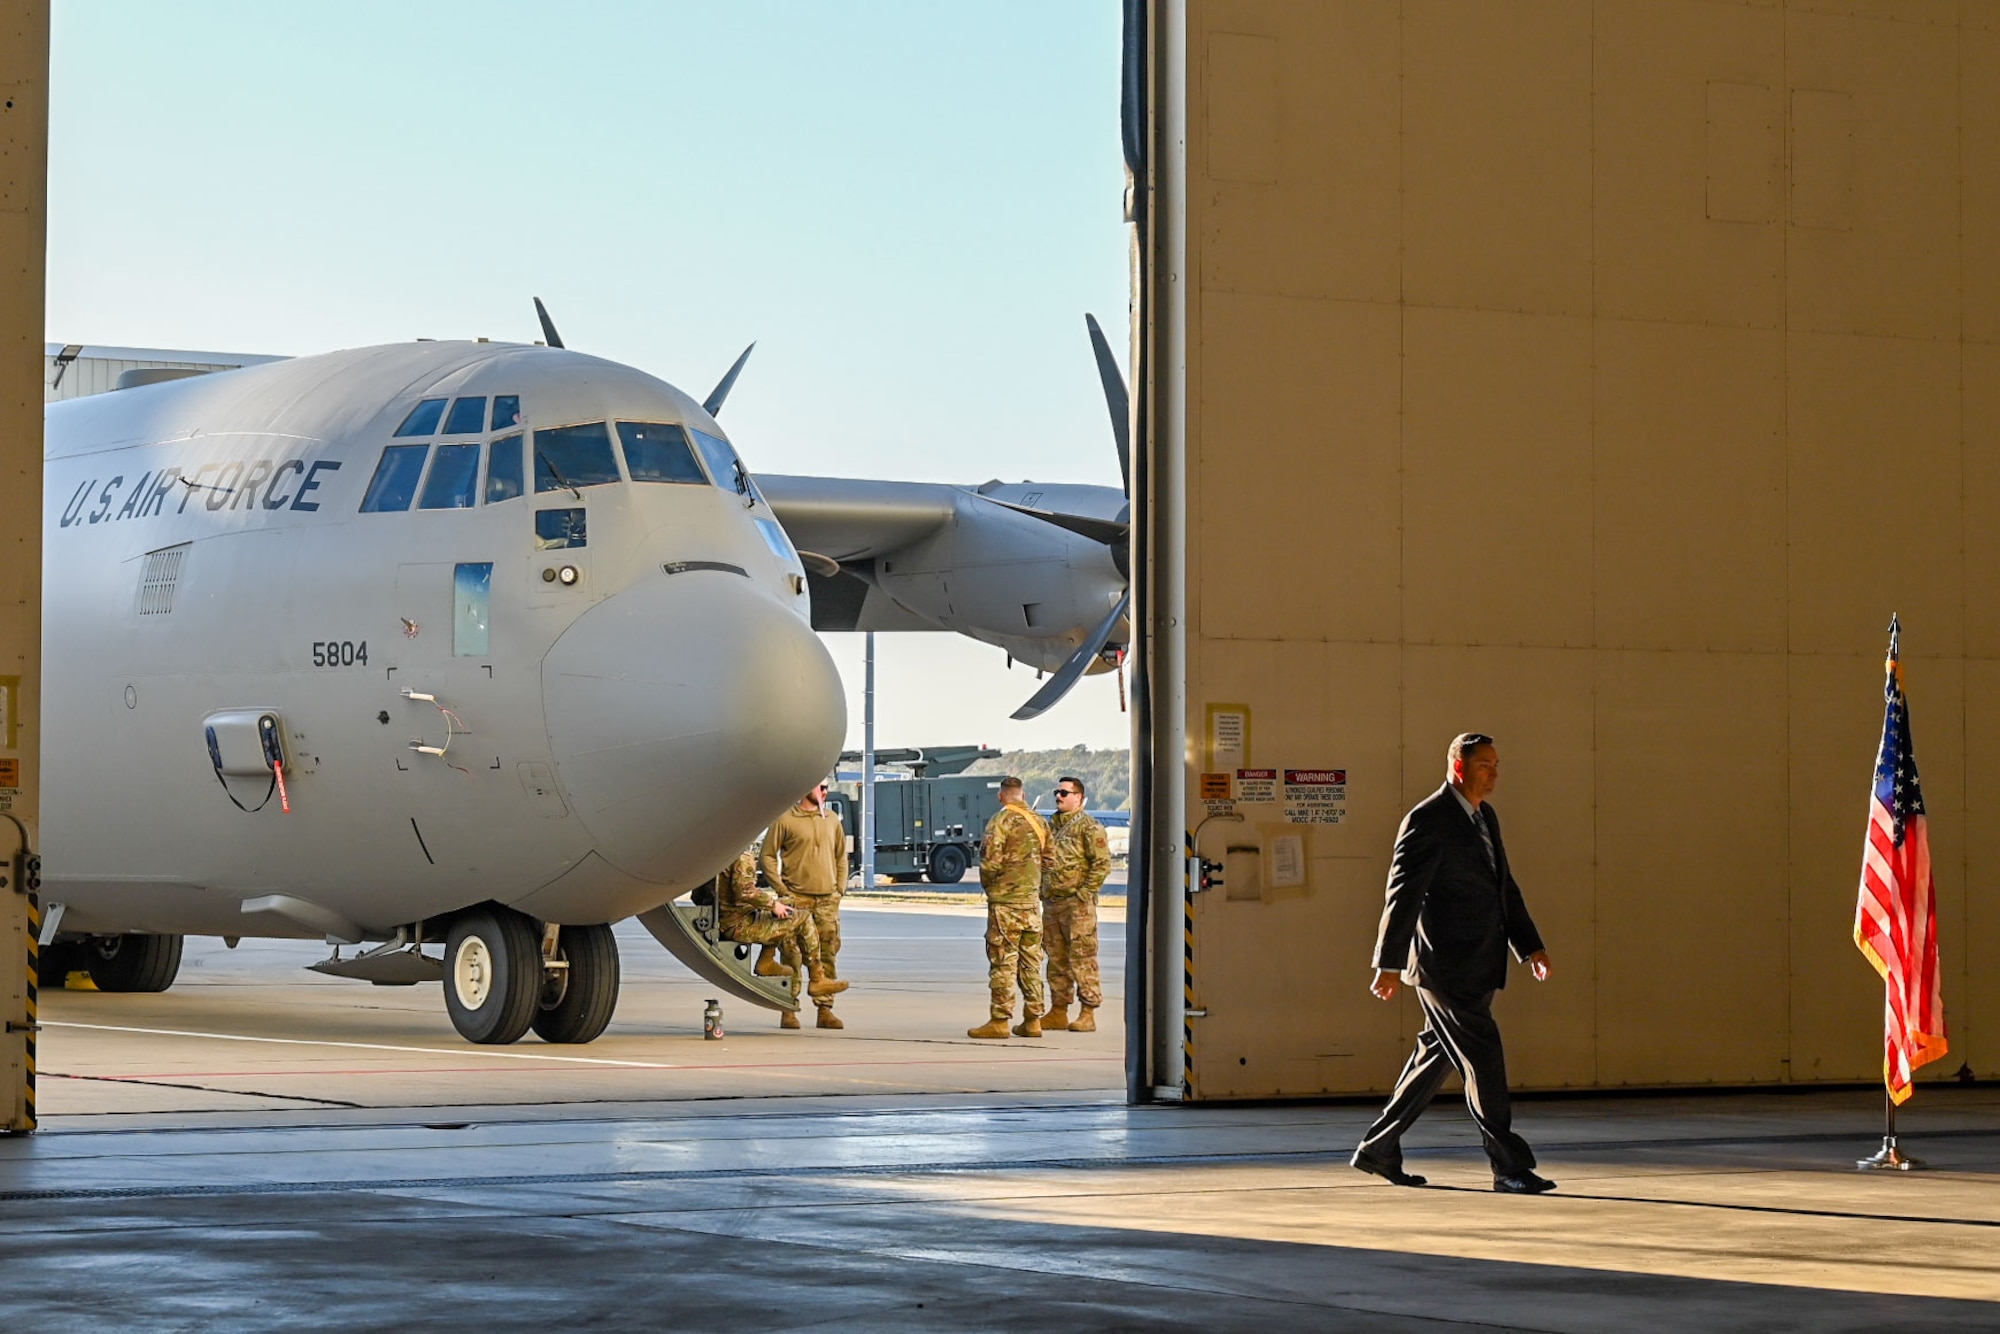 A man walks into a hangar with a C-130J aircraft in the background.